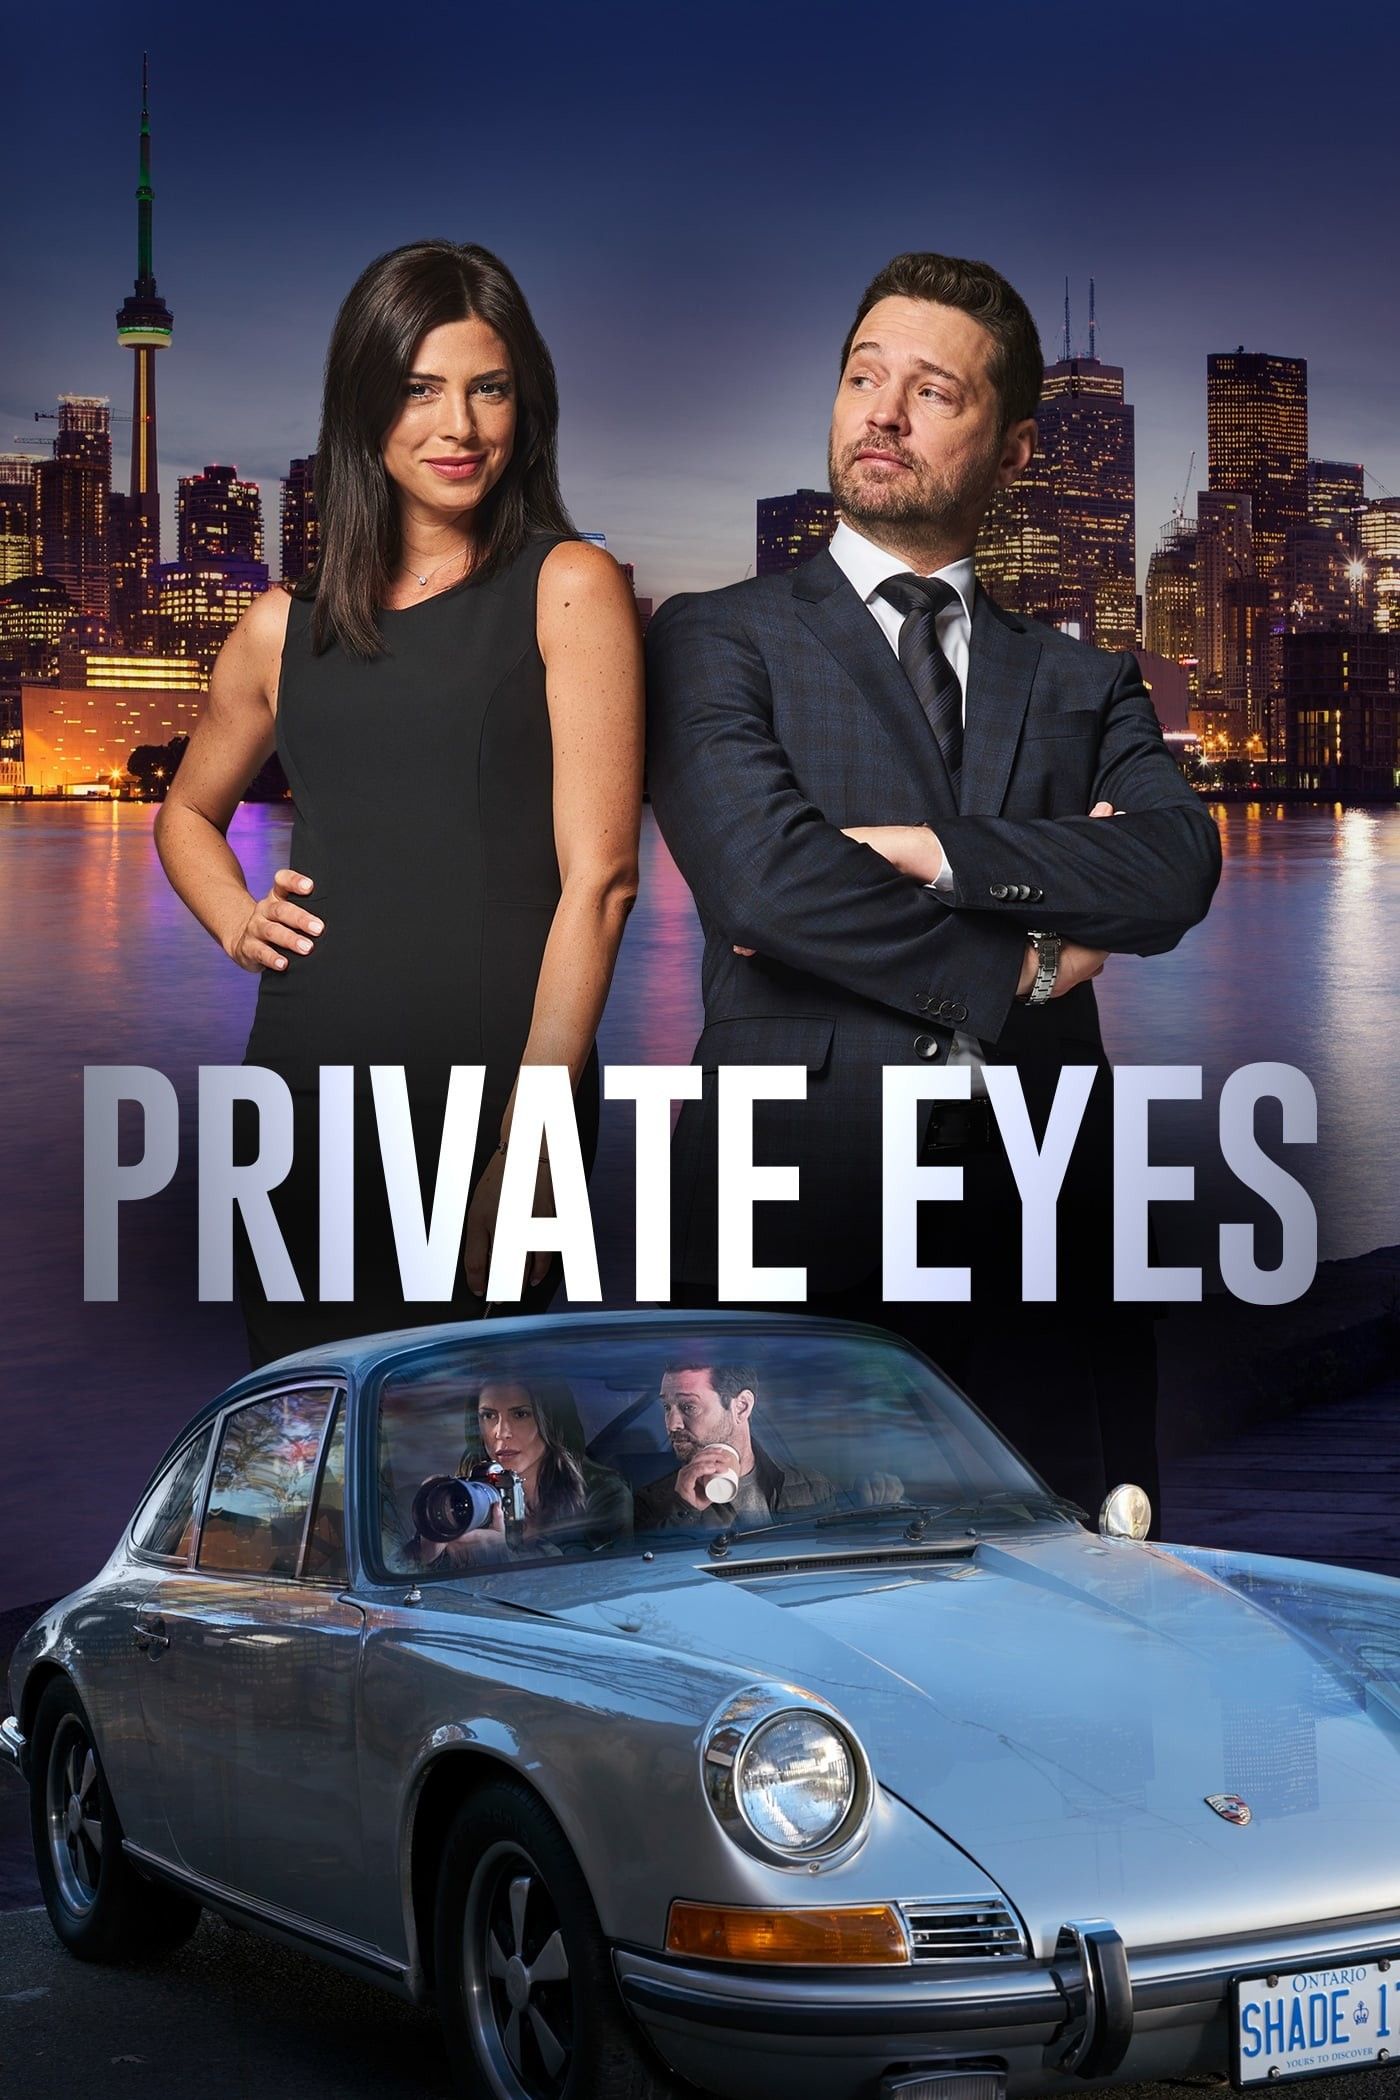 Private Eyes TV Show Information & Trailers | KinoCheck